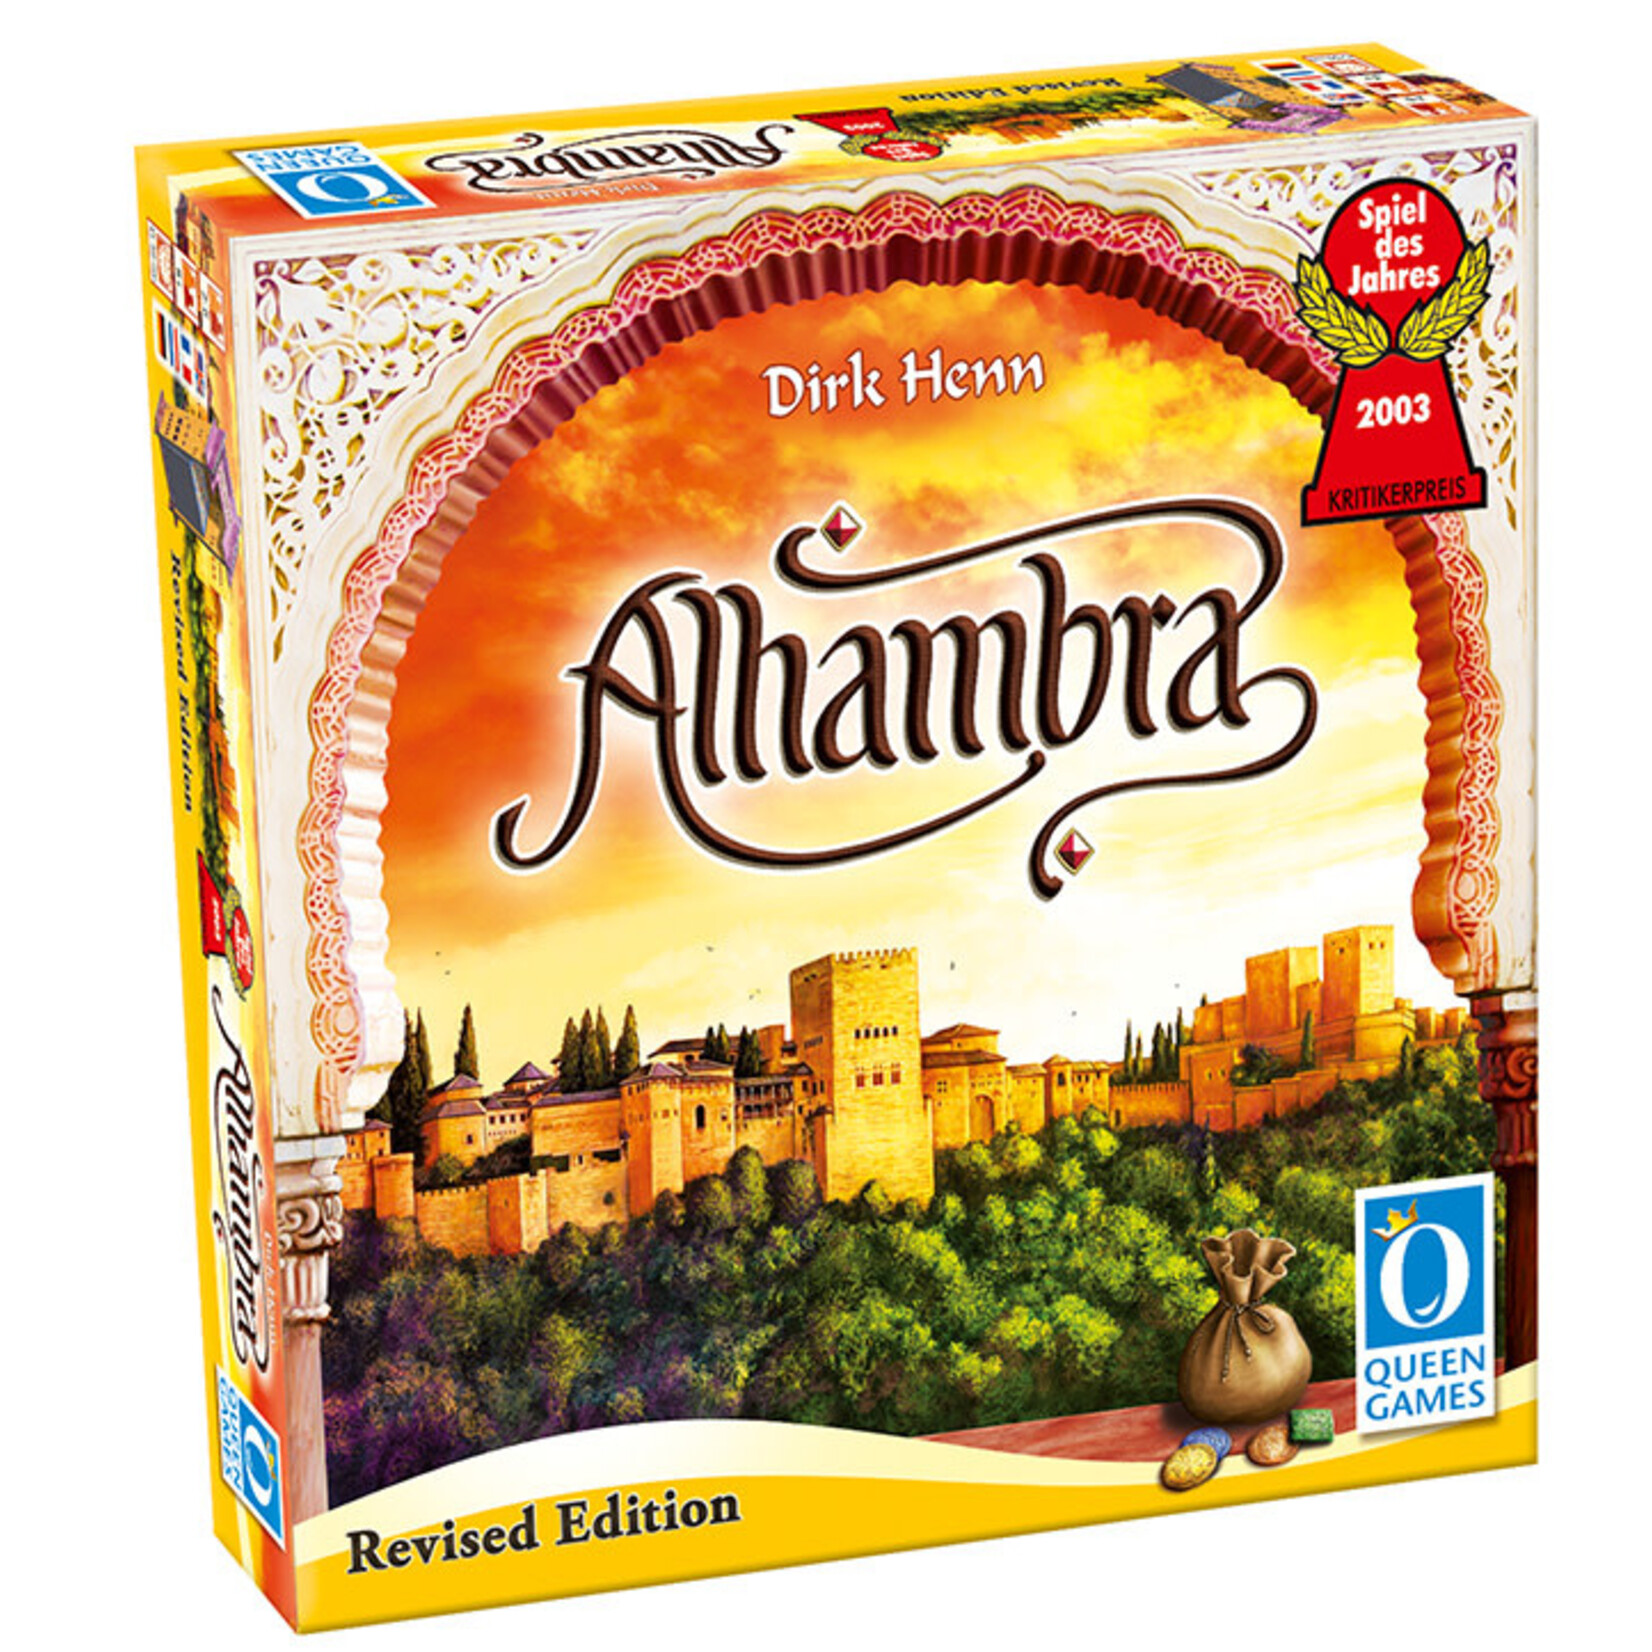 Queen games Queen Games Alhambra Revised Edition